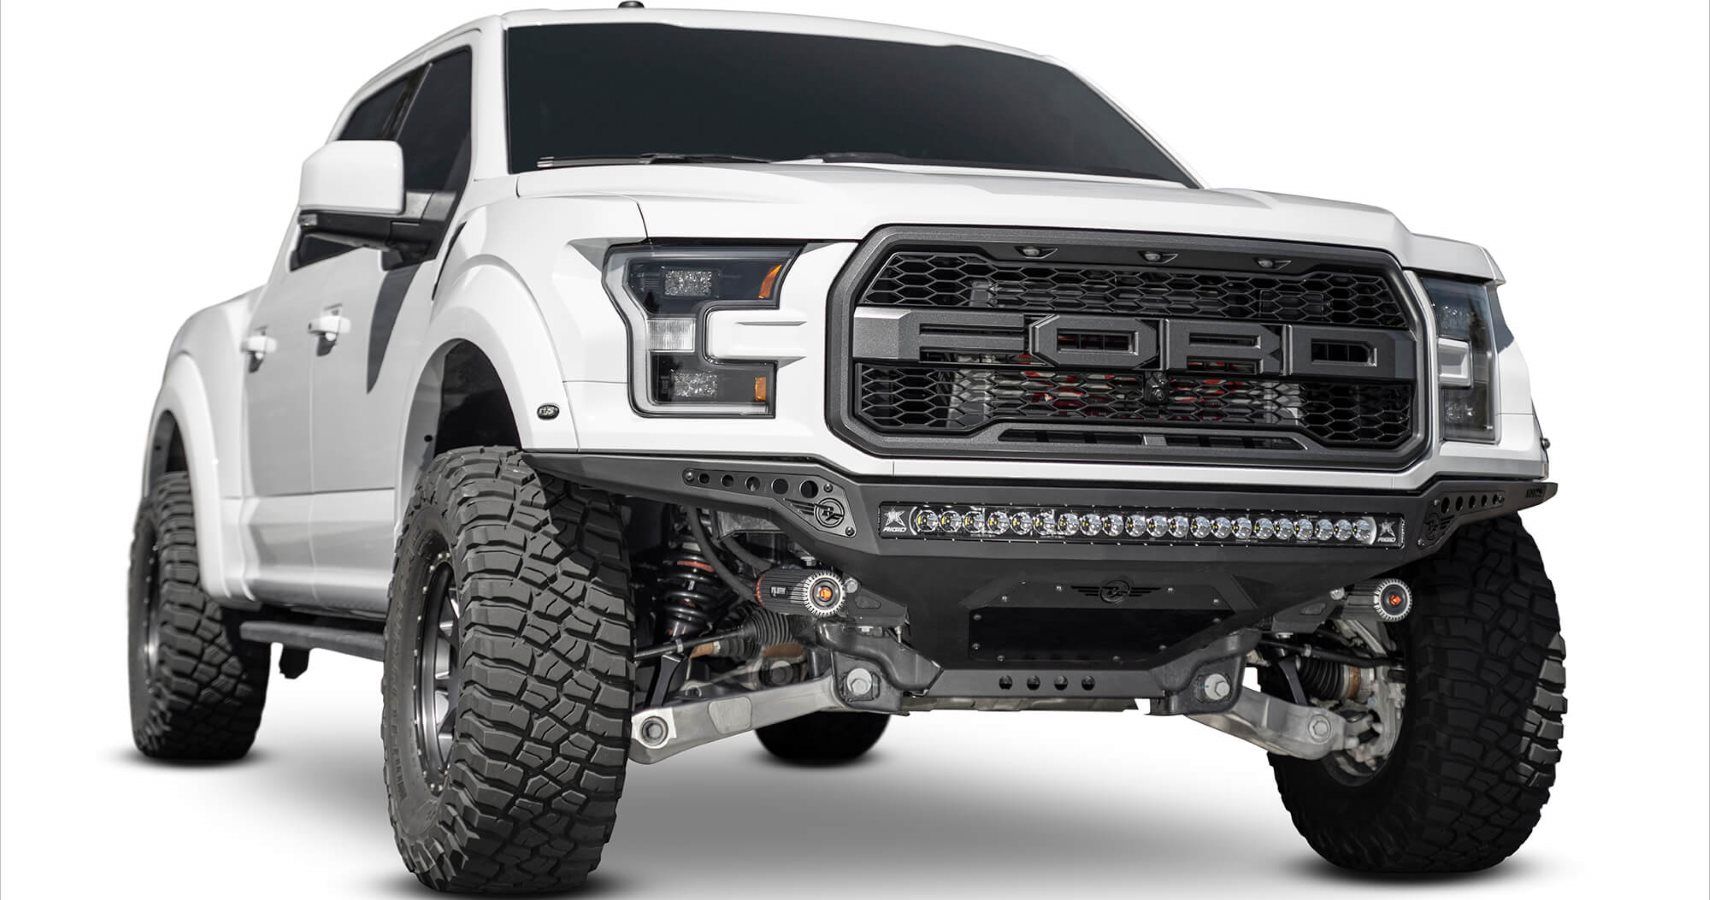 Addictive Desert Designs Brings Out More Pickup Parts To Customize Your Truck